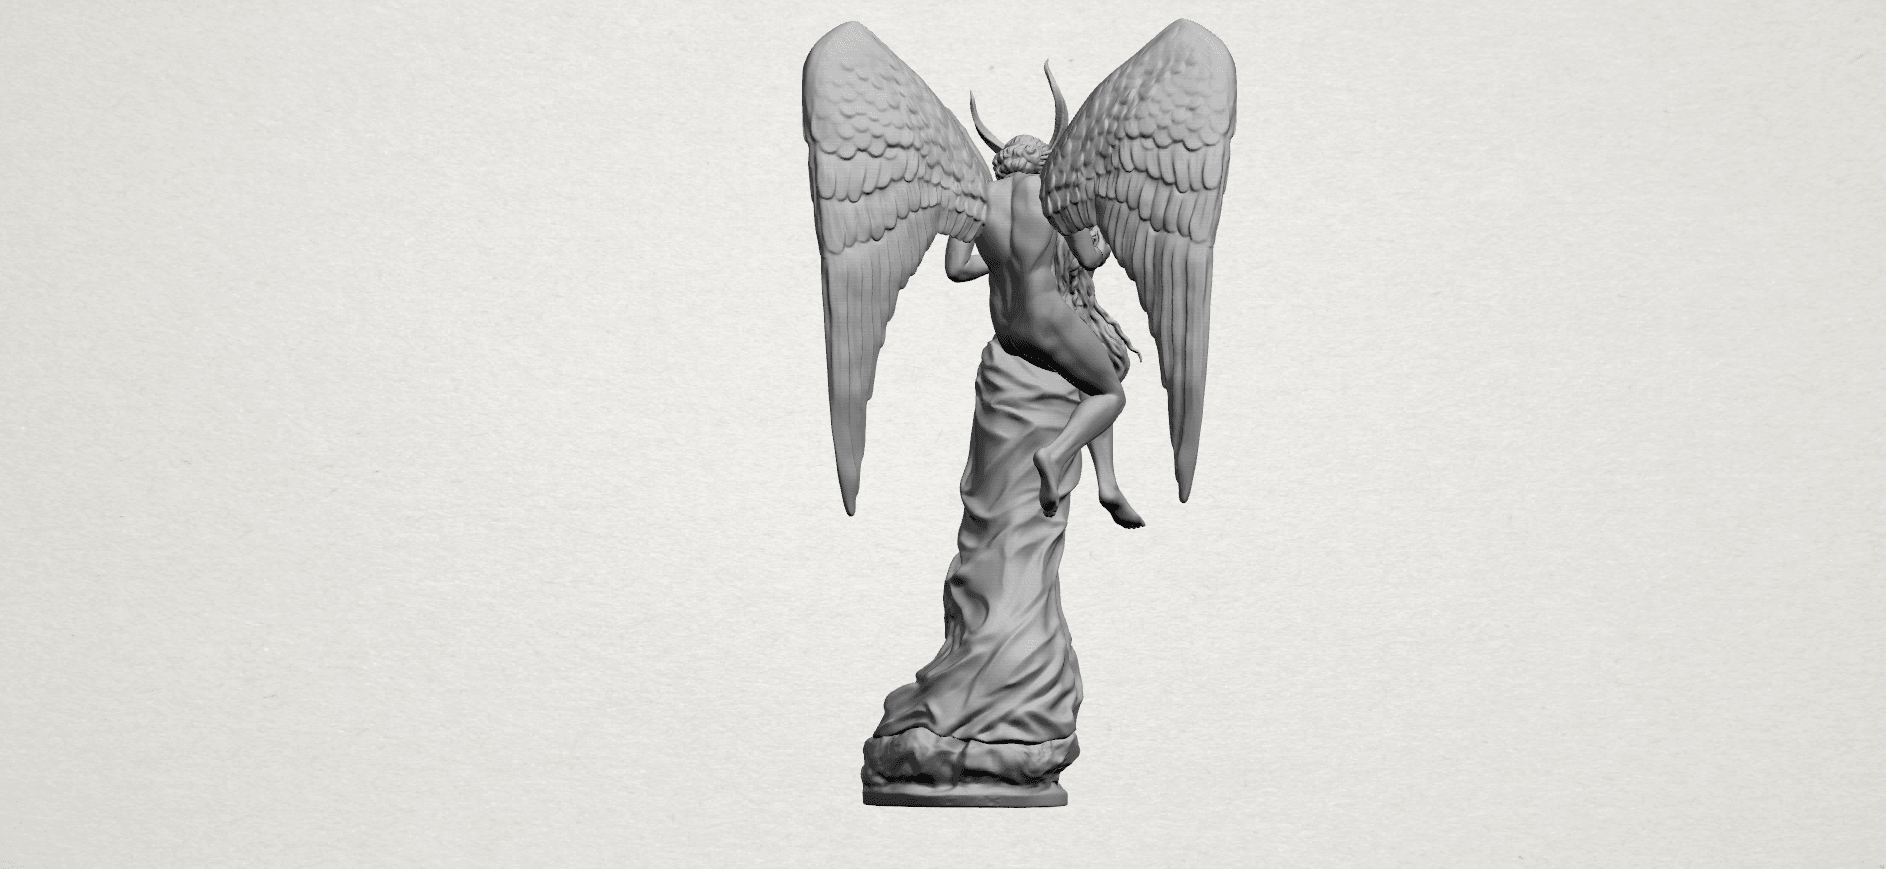 Angel and devil - A09.png Download free STL file Angel and devil • 3D printable object, GeorgesNikkei